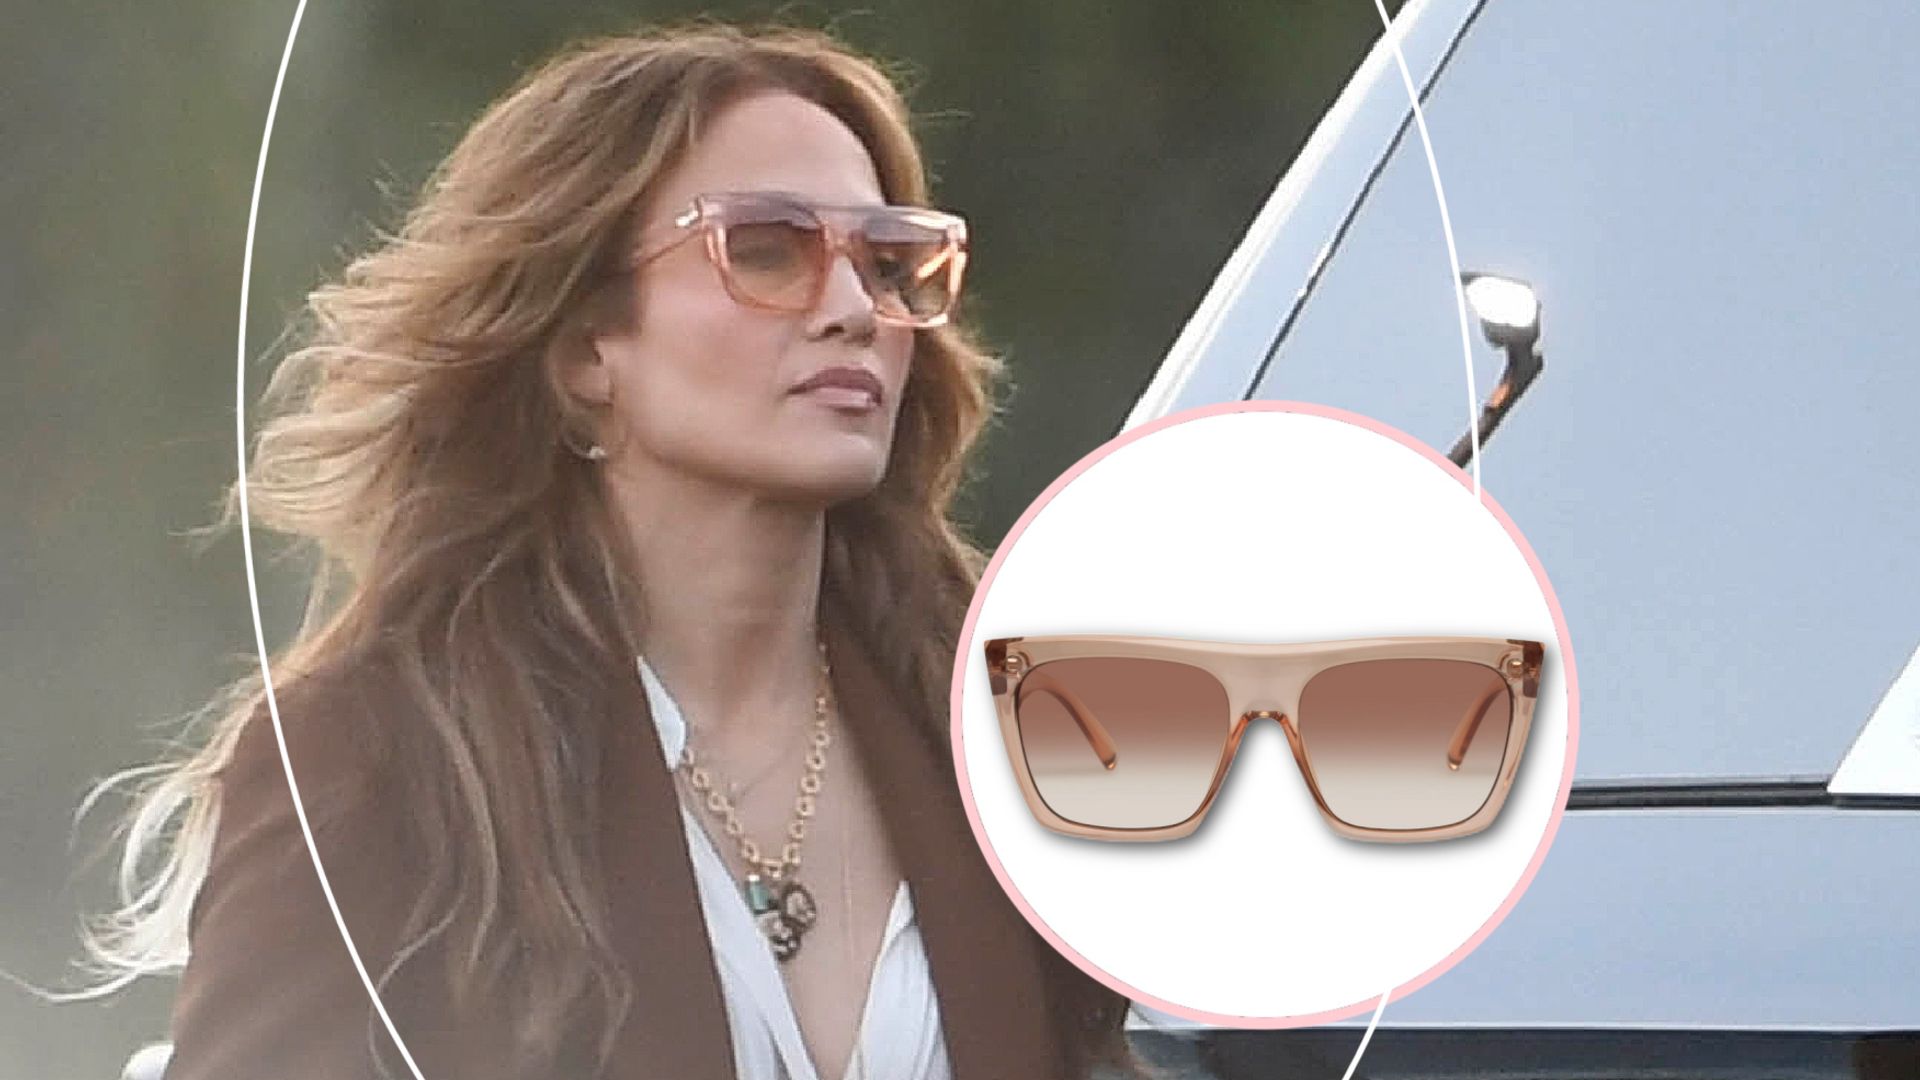 Jennifer Lopez's retro sunglasses are on sale and they cost less than you think